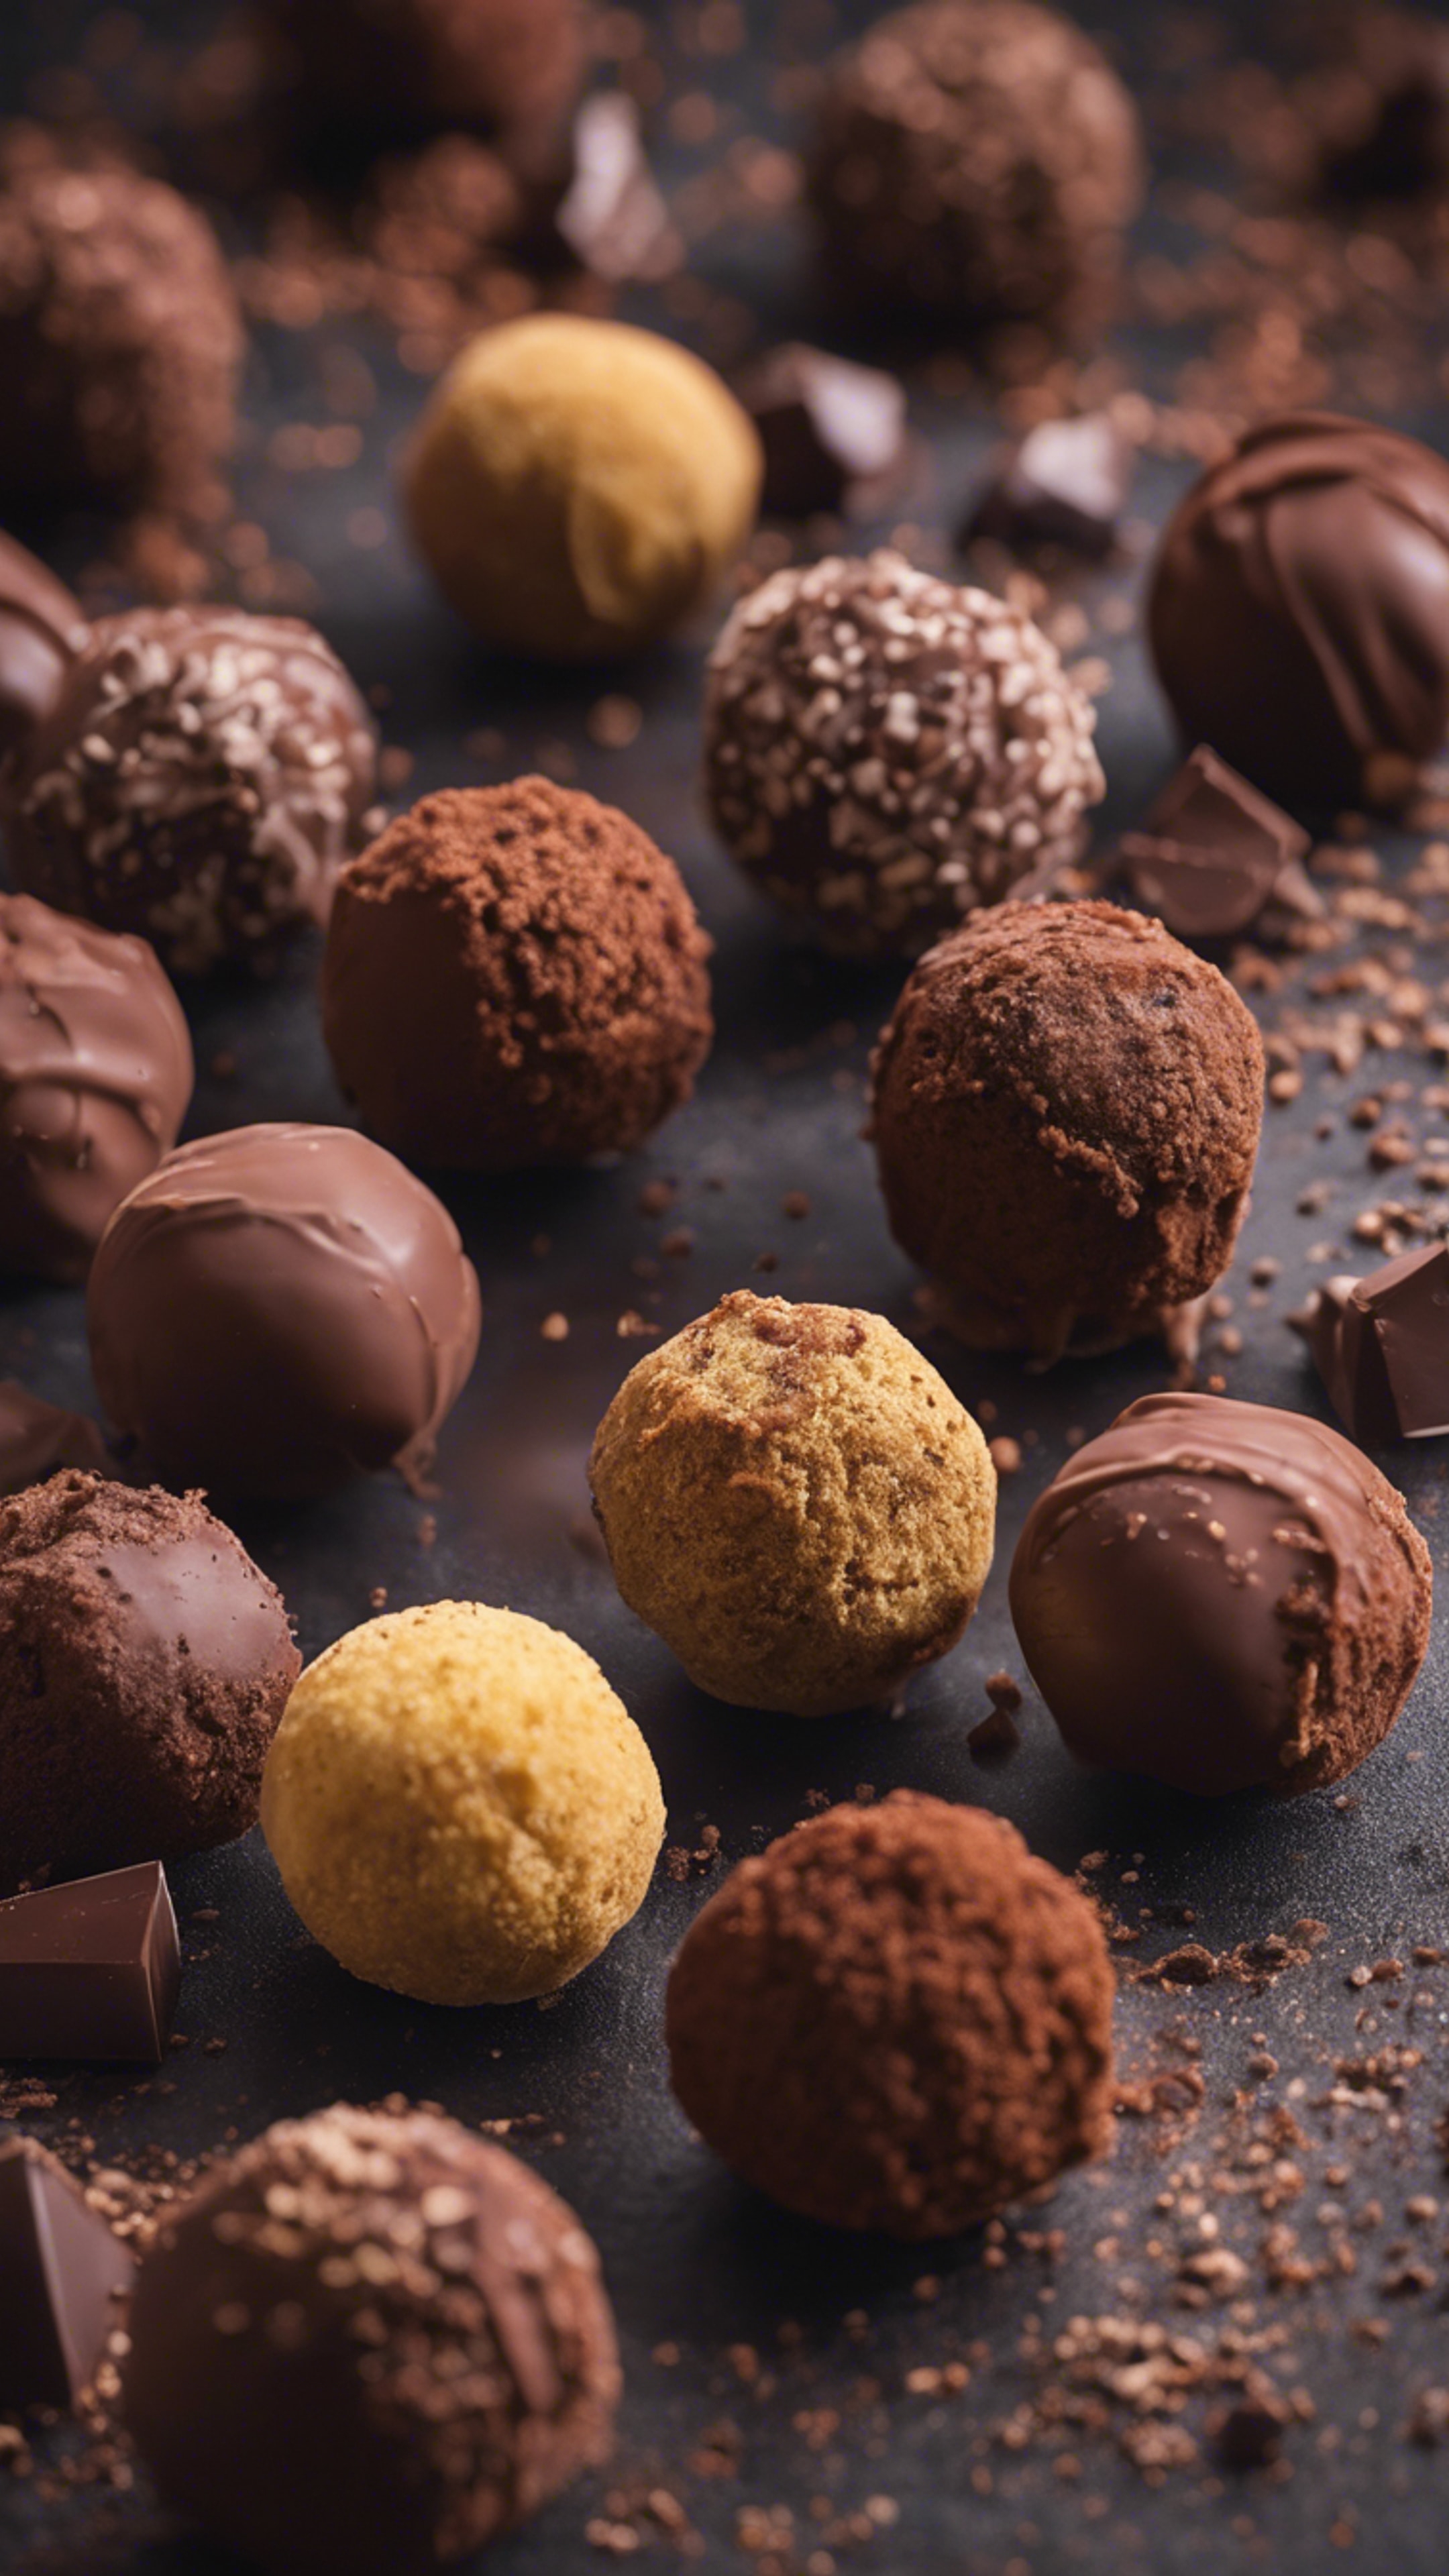 An assortment of delicious, delectable brown chocolate truffles Behang[070a36241272450fb9f4]